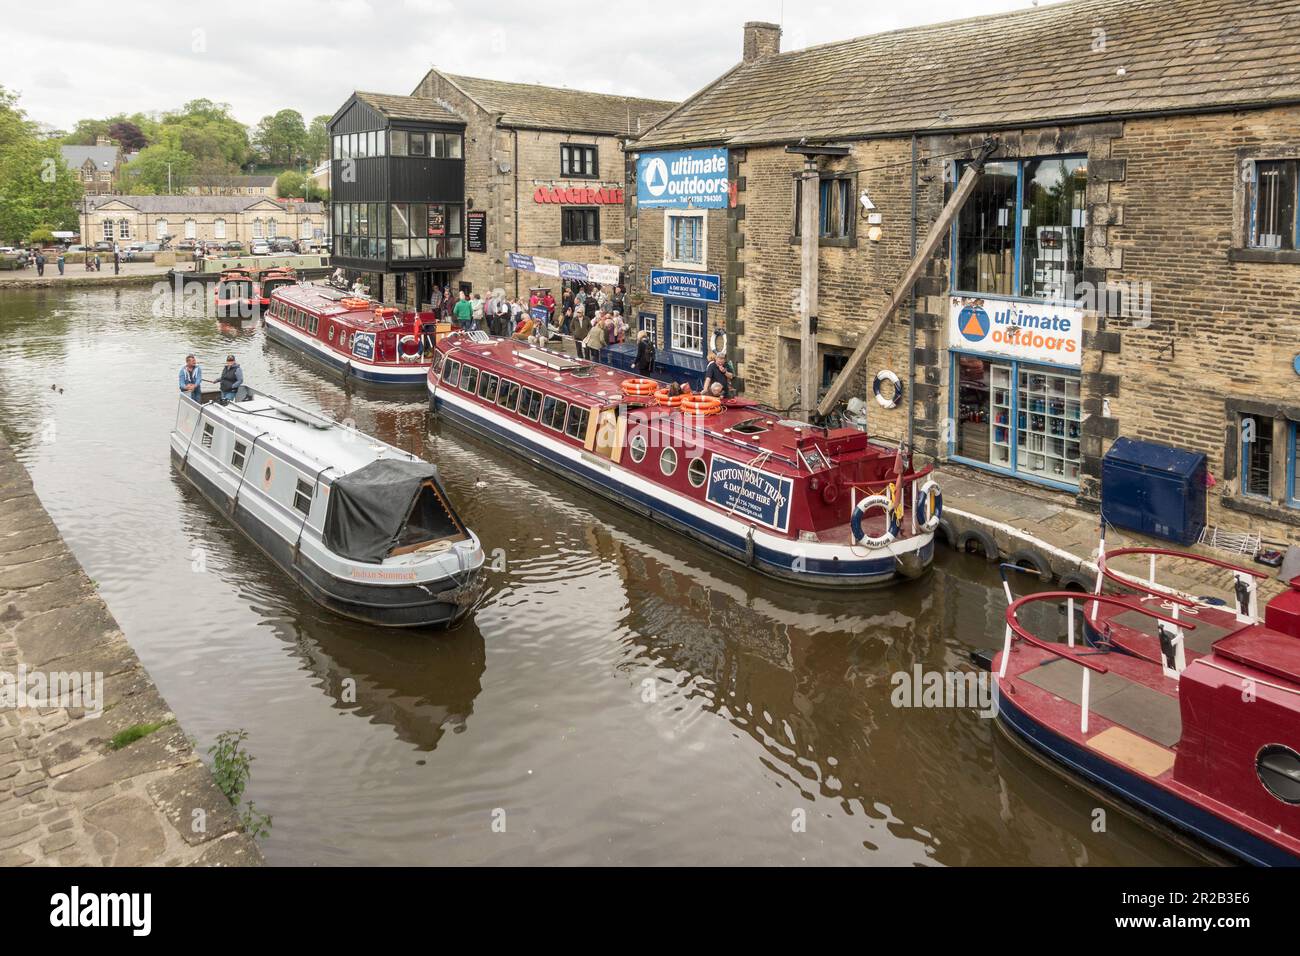 A  canal narrow boat passes people queuing for a boat trip in Skipton, North Yorkshire, England, UK Stock Photo